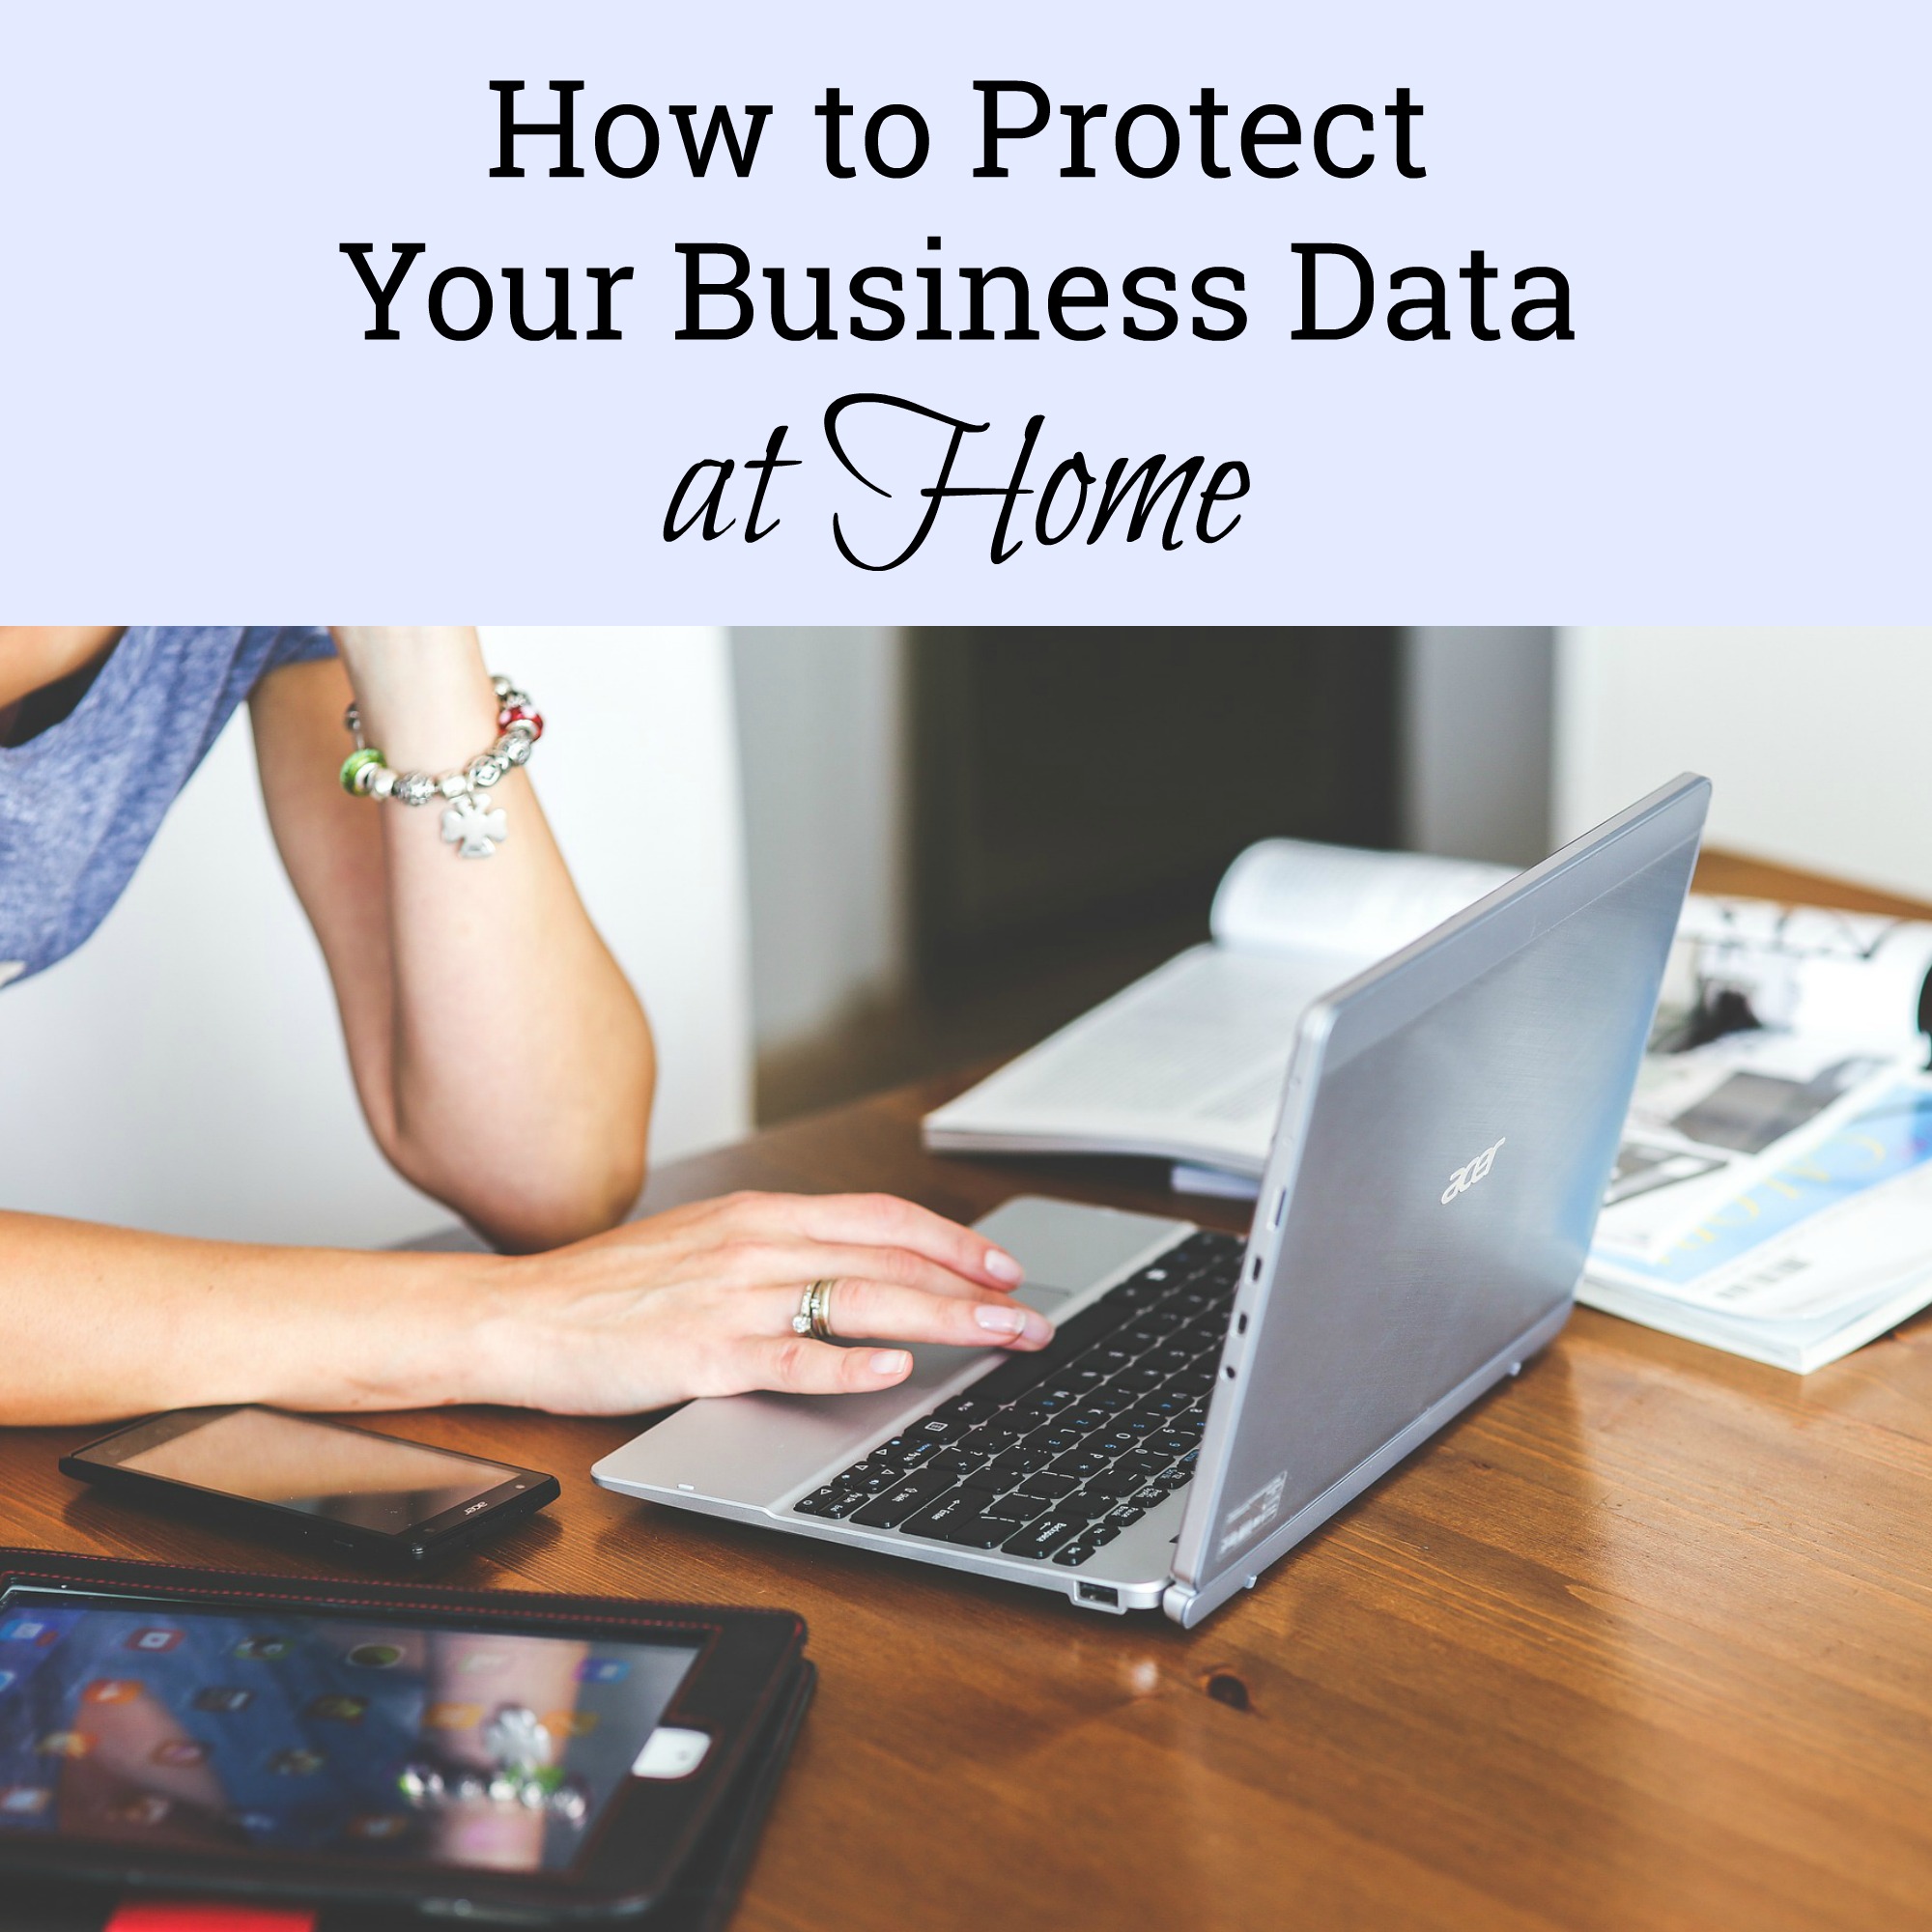 How to Protect Your Business Data